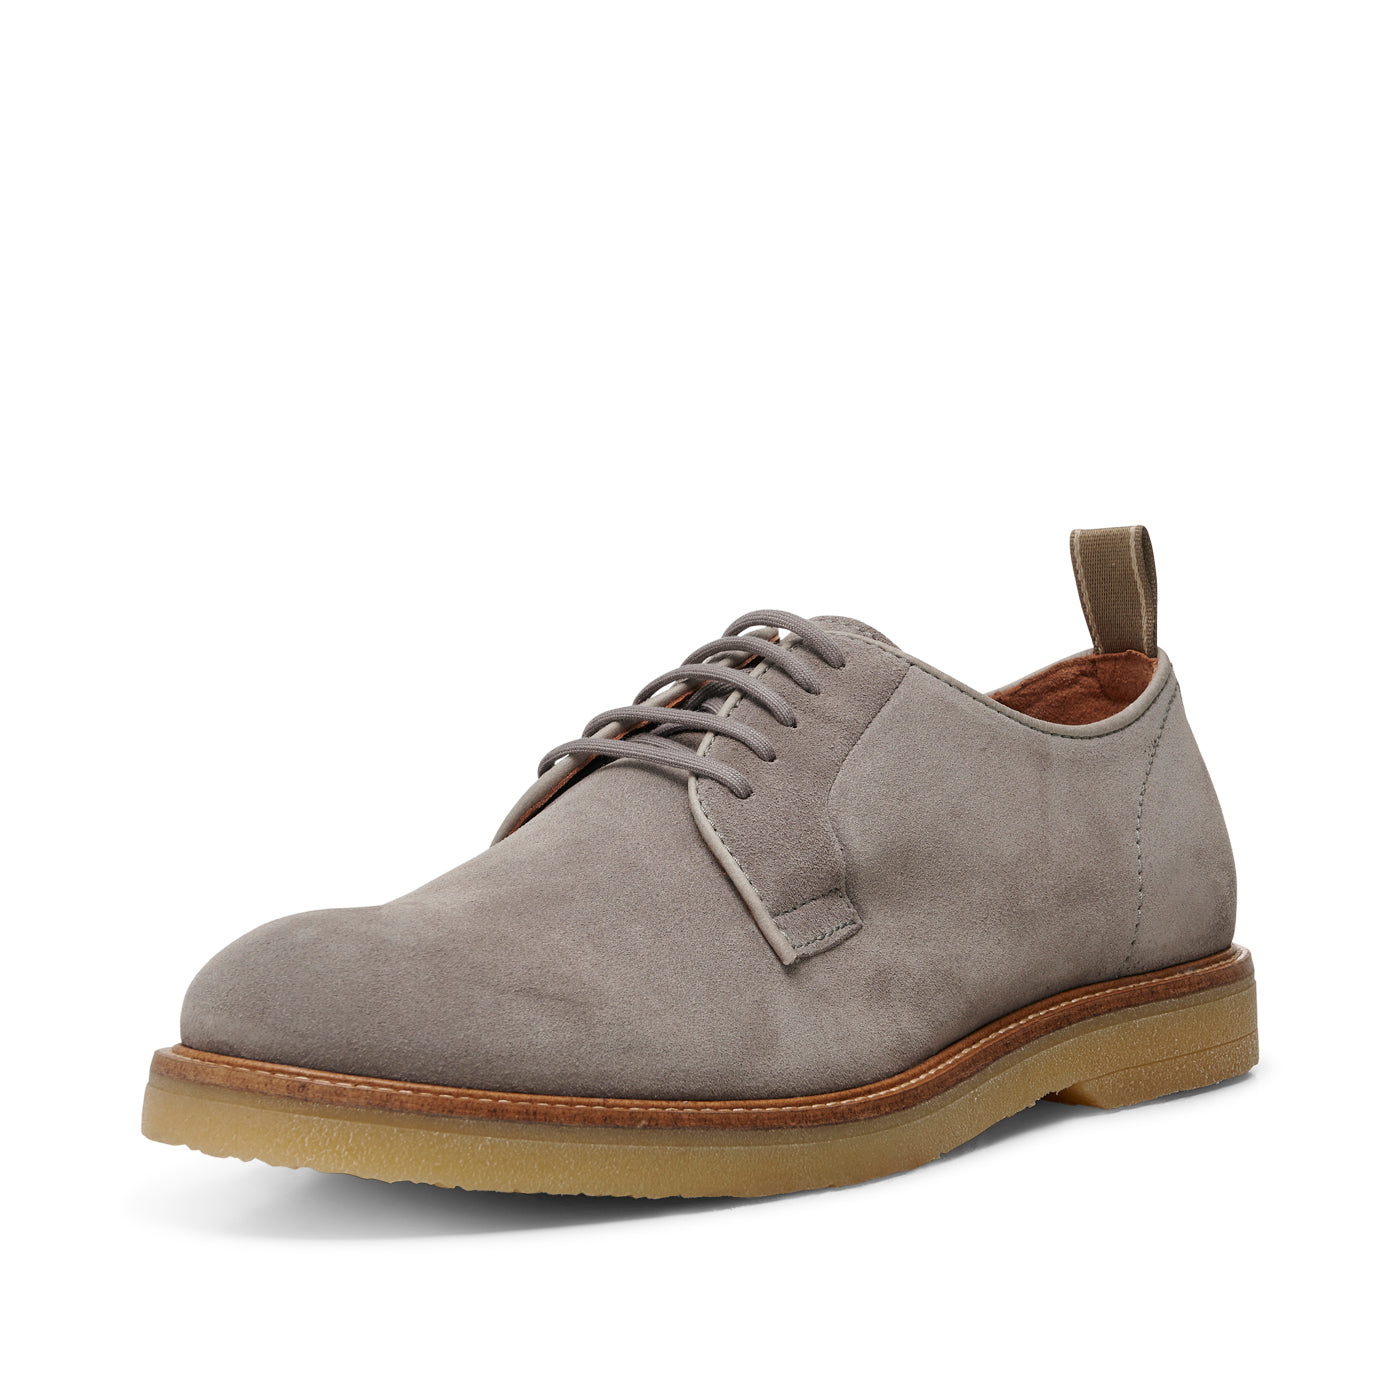 SHOE THE BEAR MENS Kip derby water repellent suede Shoes 160 TAUPE